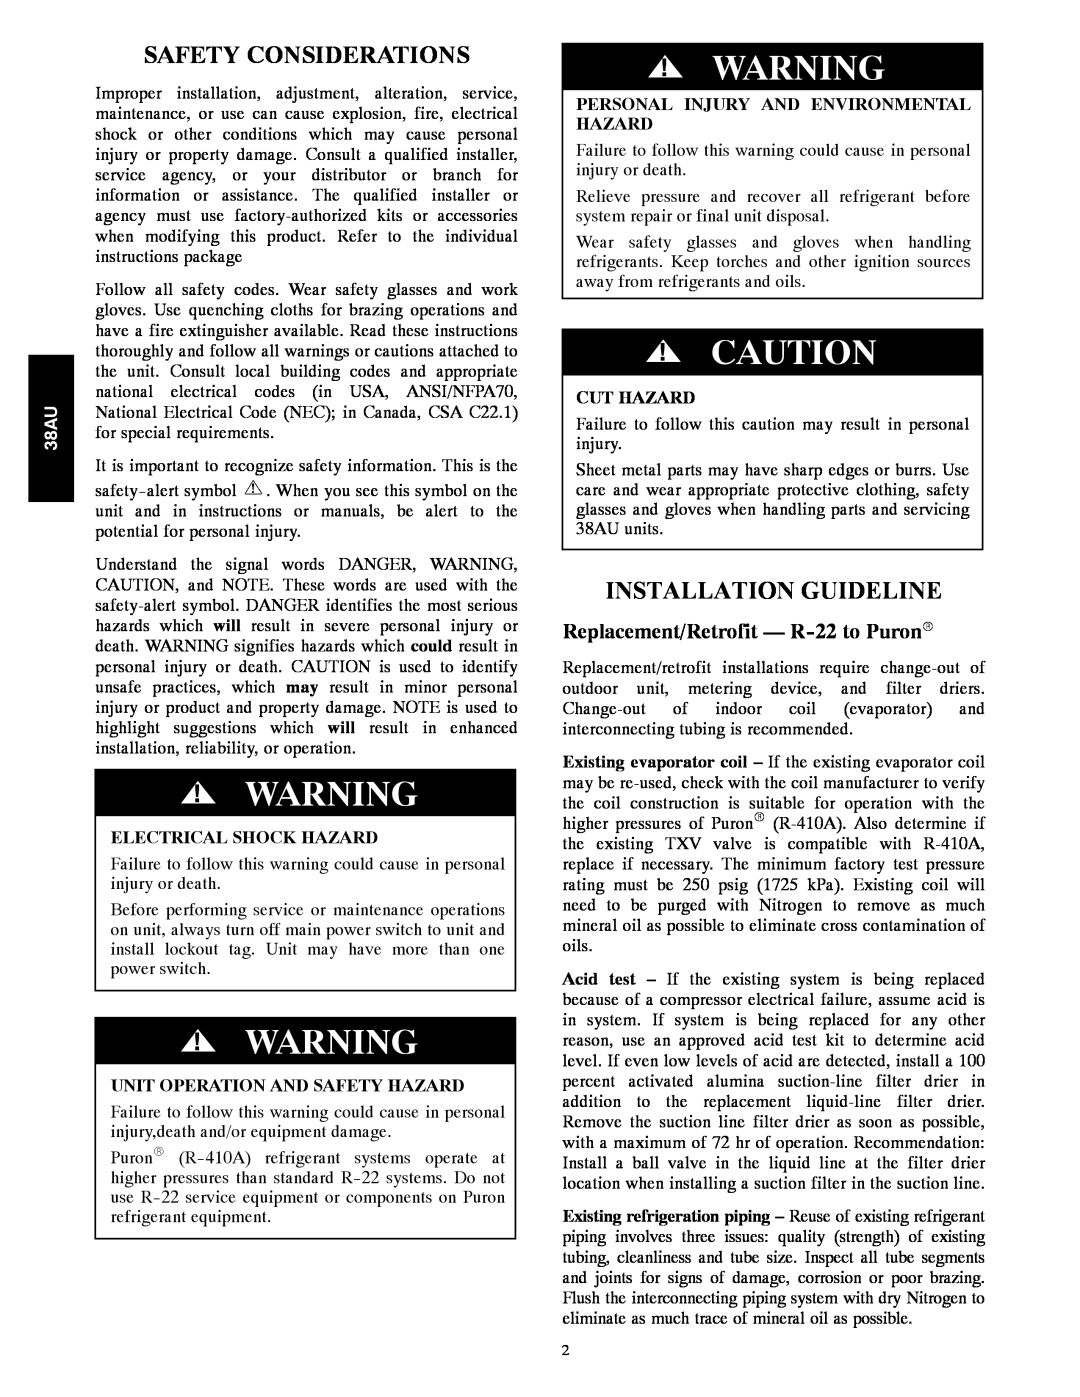 Carrier 38AU Safety Considerations, Installation Guideline, Replacement/Retrofit - R-22to PuronR, Electrical Shock Hazard 